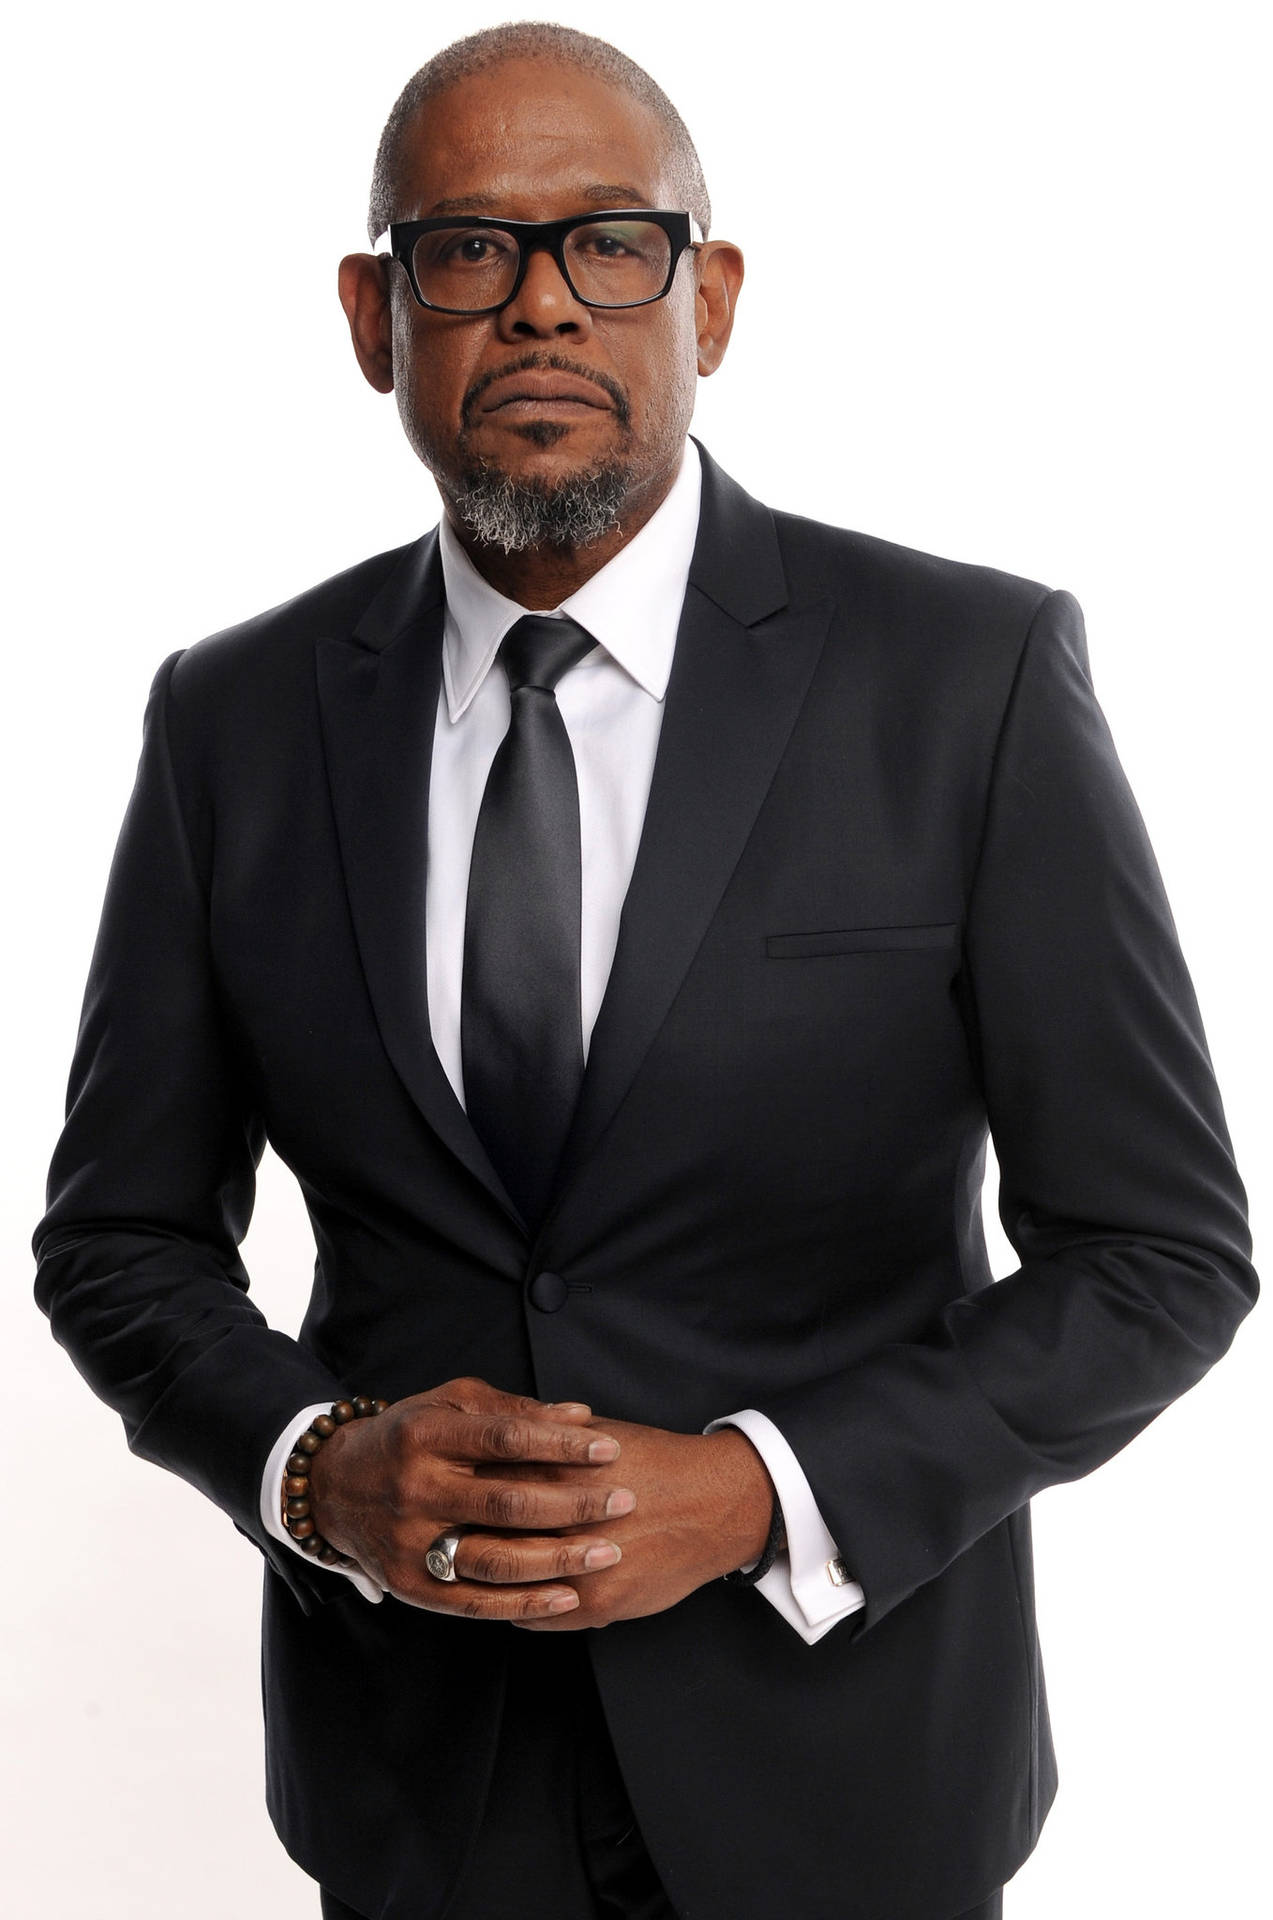 Distinguished Forest Whitaker in a Suit at a Studio Shoot Wallpaper